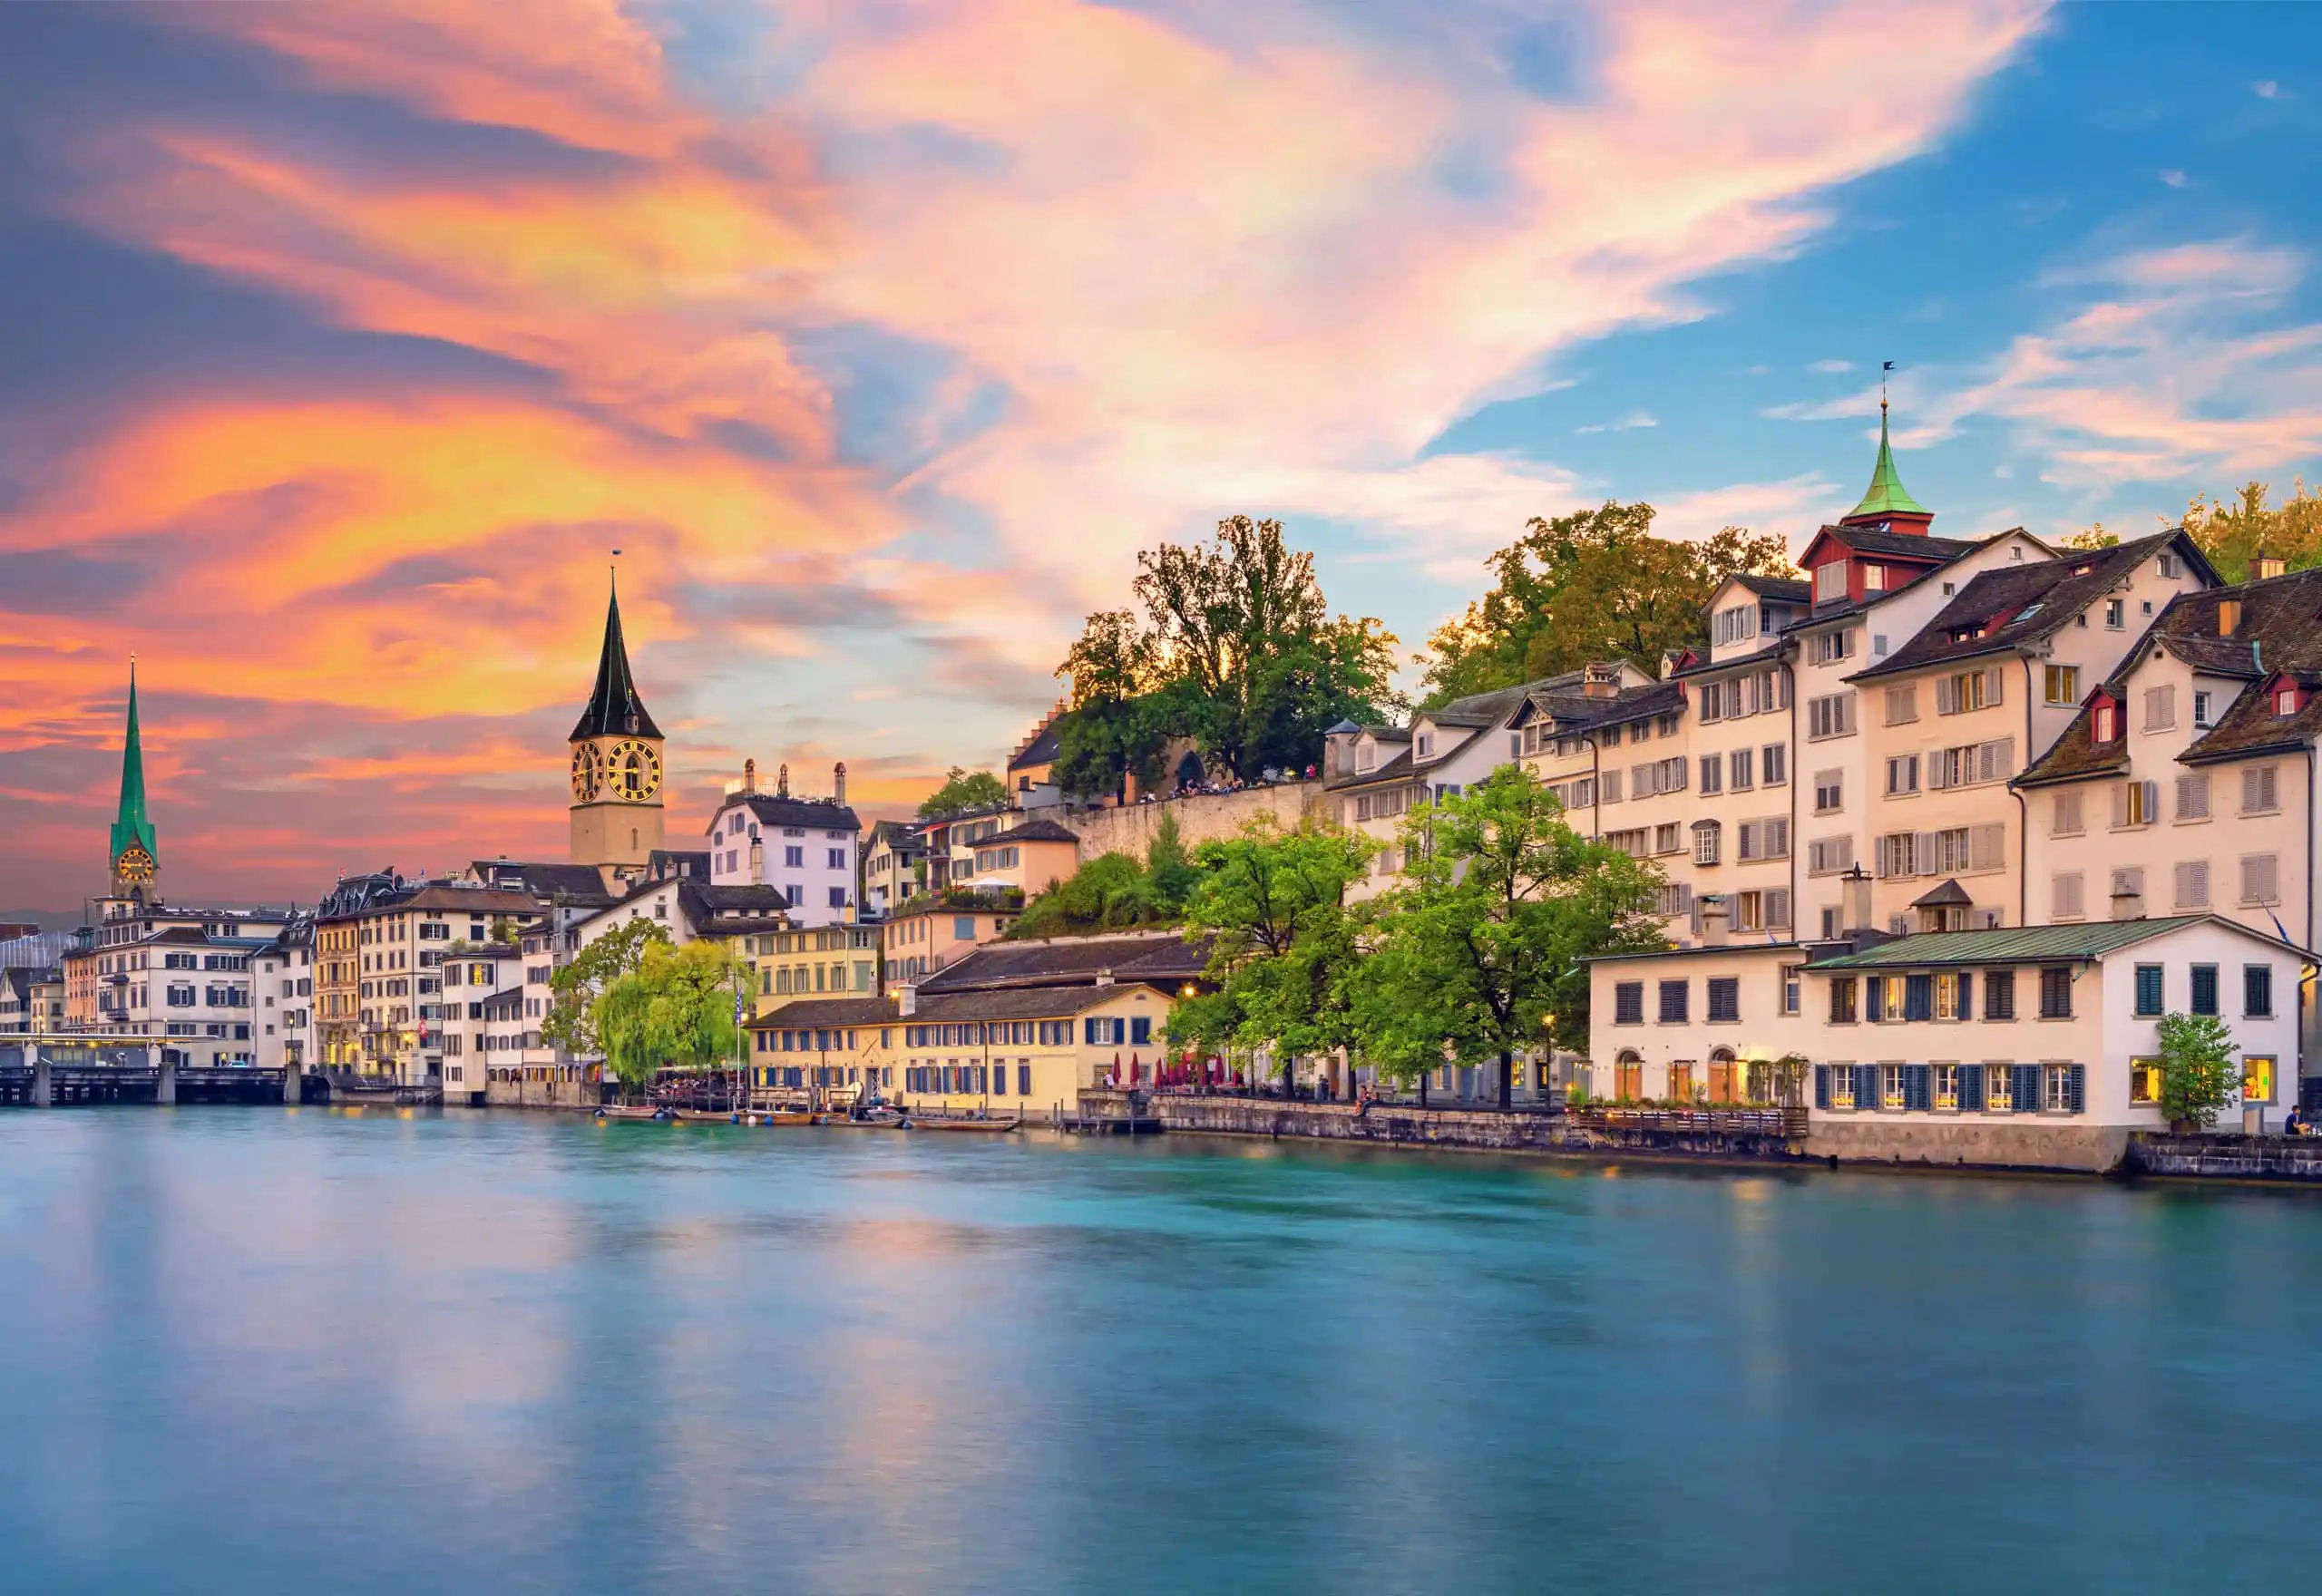 Finance , Accounting and Budgeting Courses in Zurich